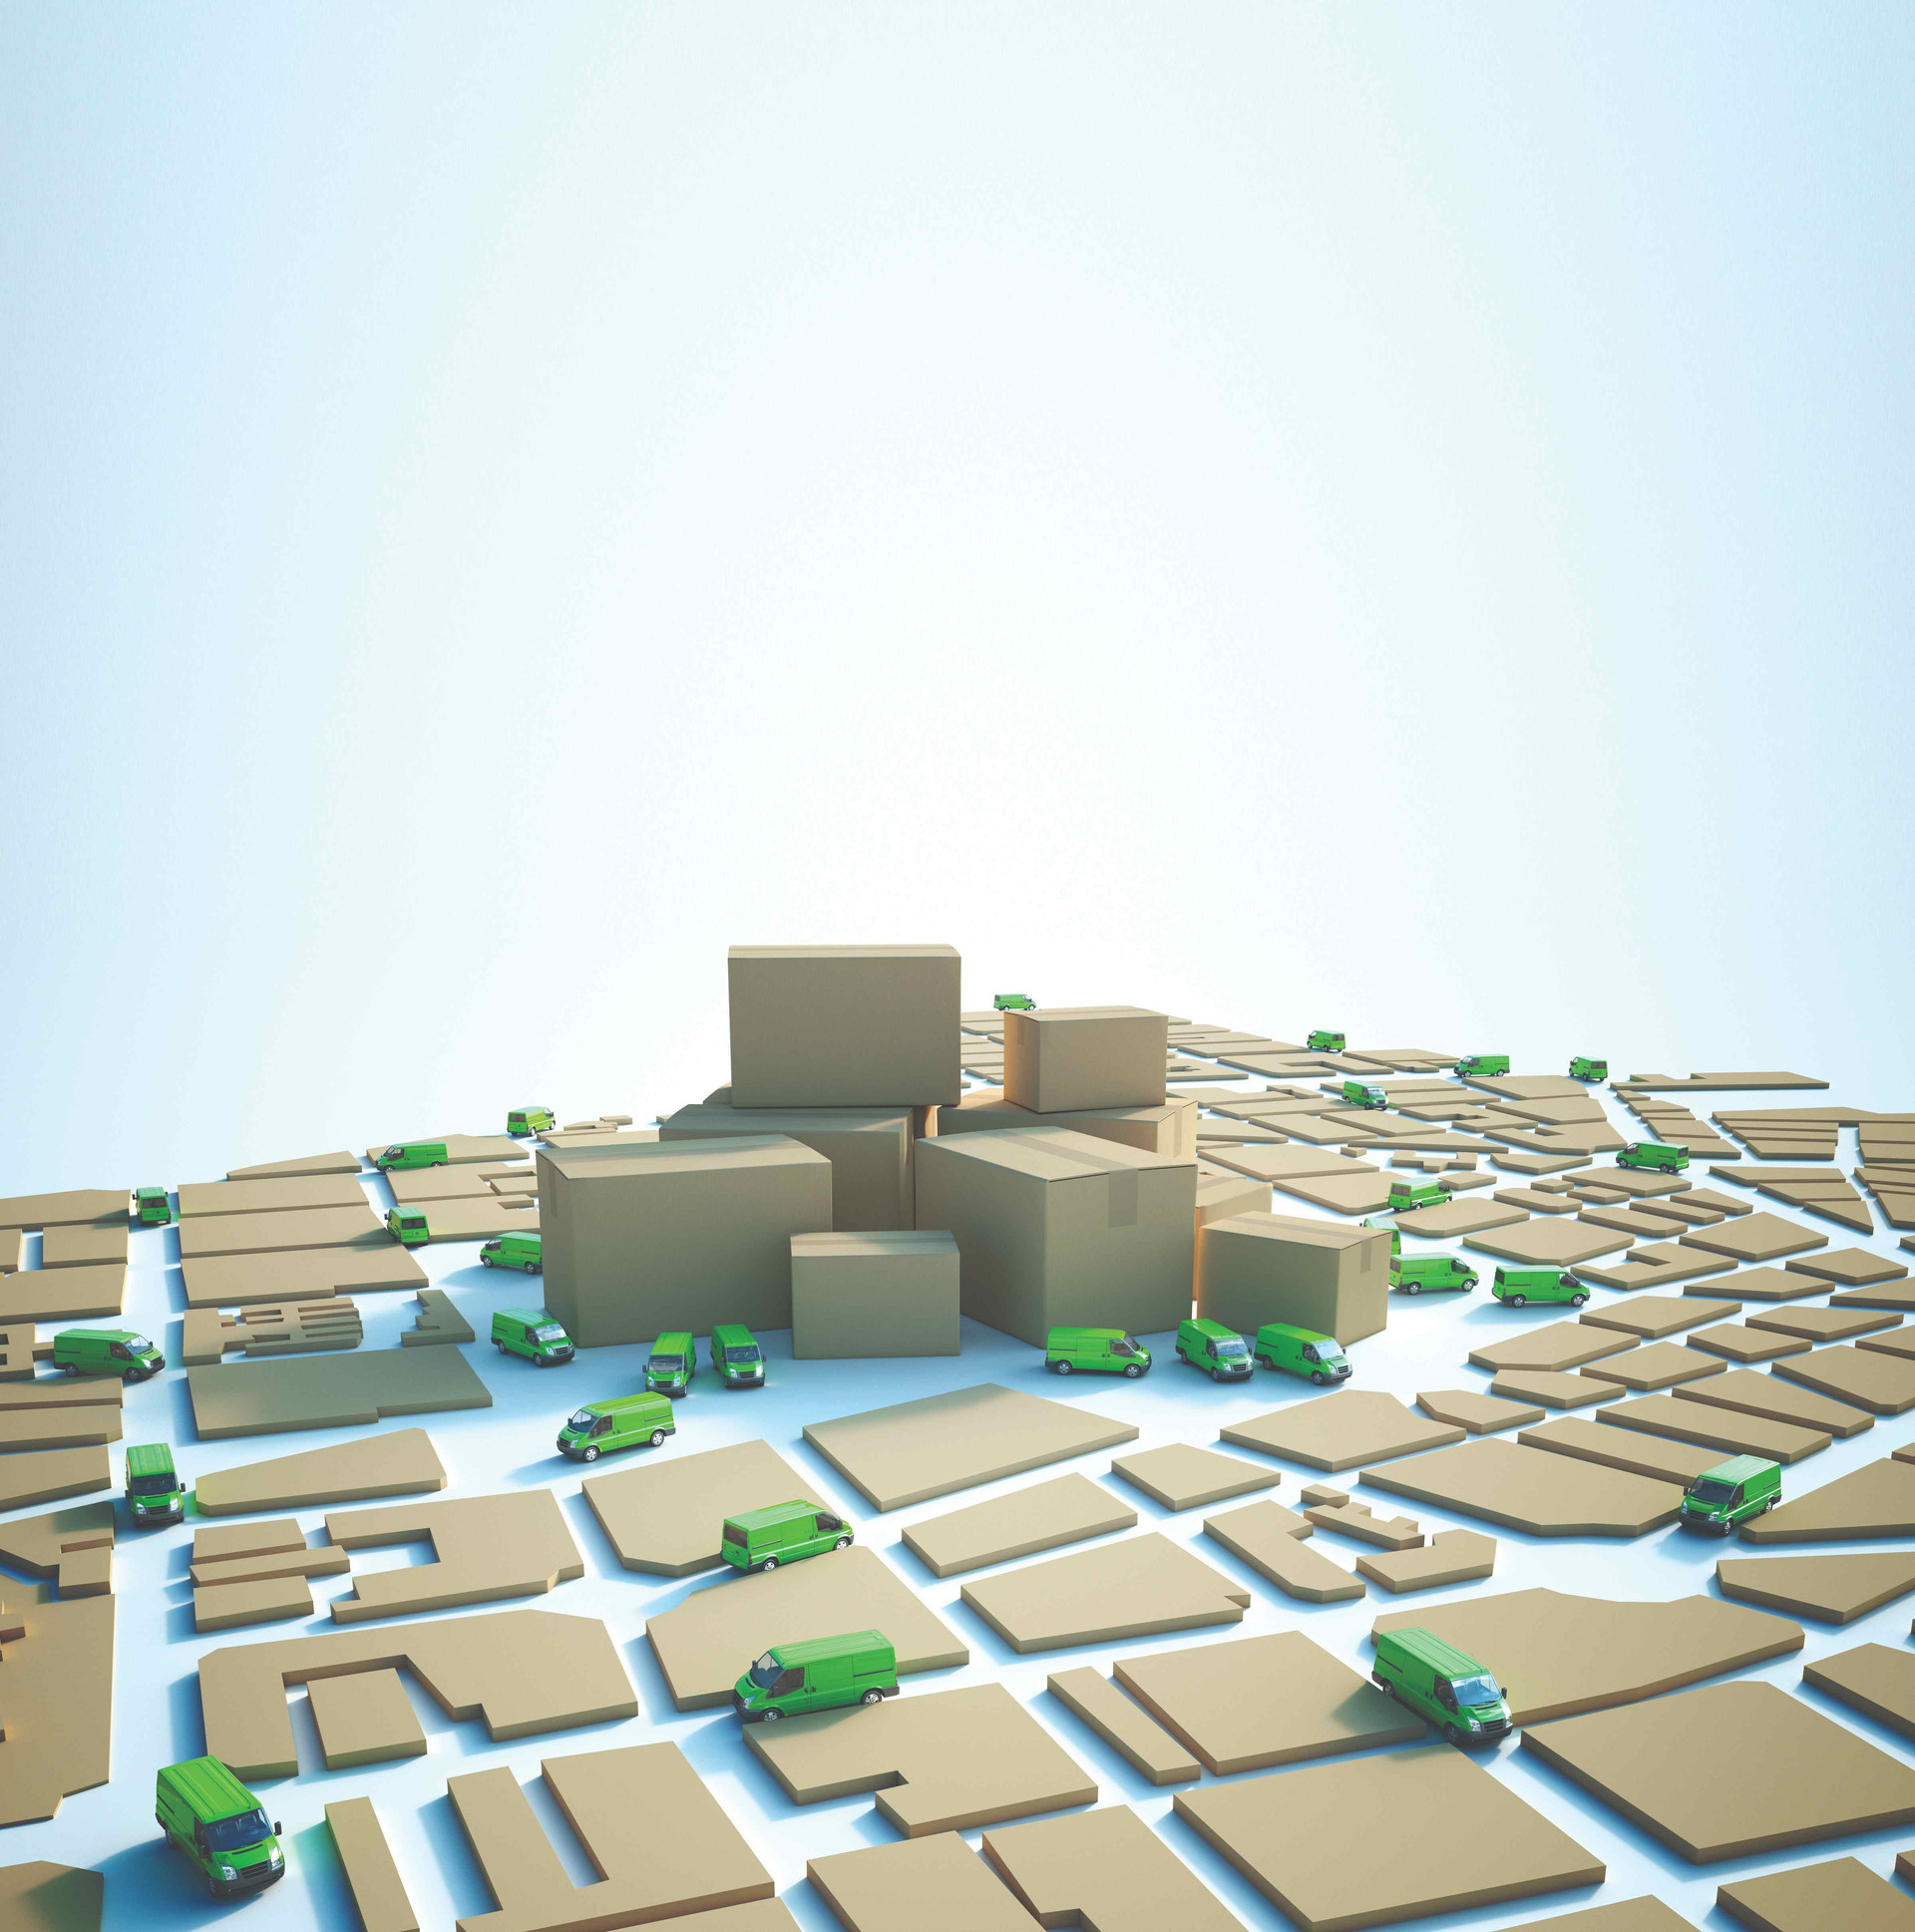 3d-rendering-cardboard-textured-map-with-green-trucks-circulating-pile-cartons-compressed.jpeg